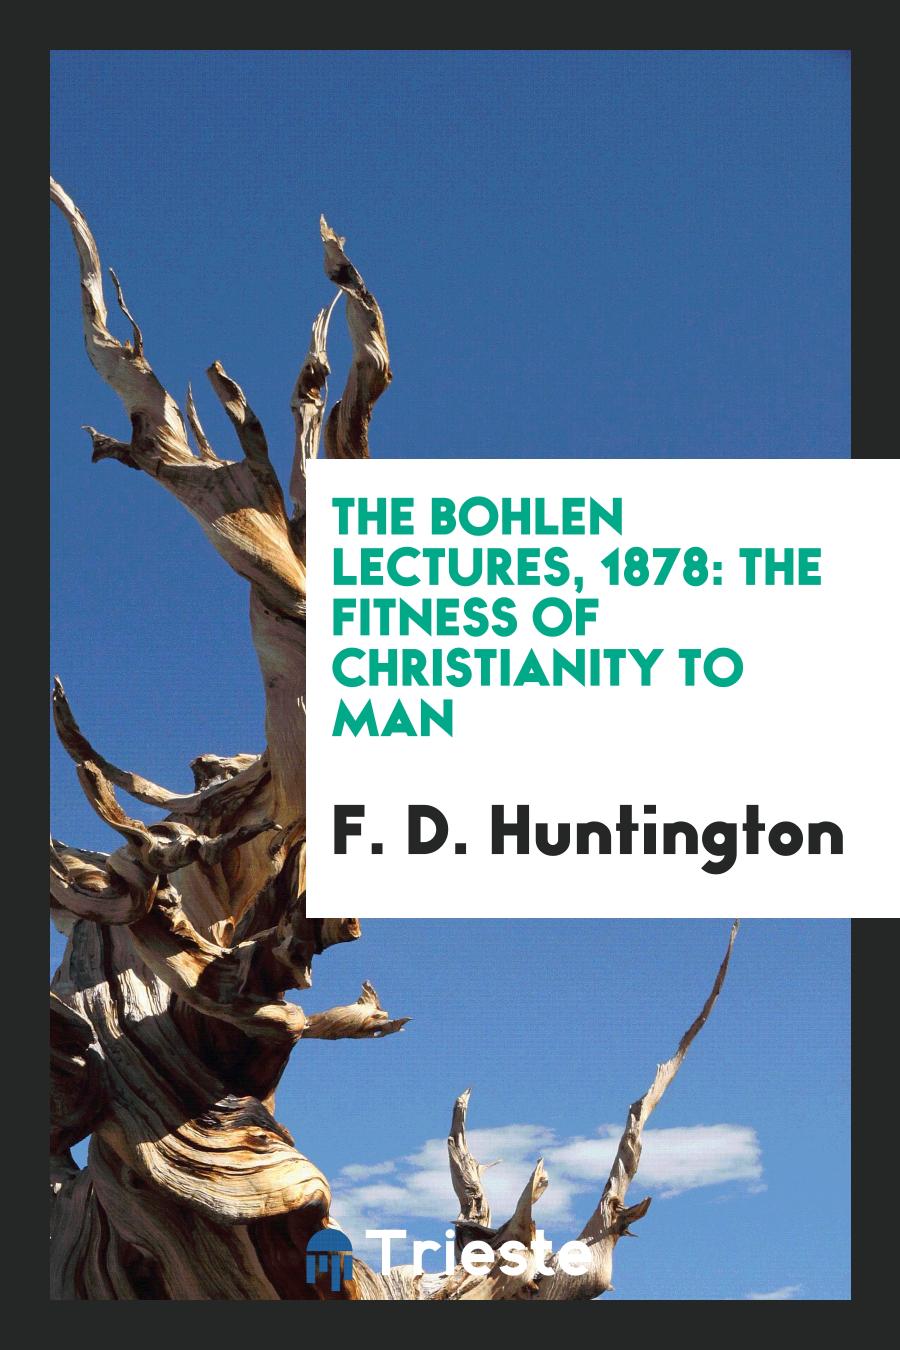 The Bohlen Lectures, 1878: The Fitness of Christianity to Man